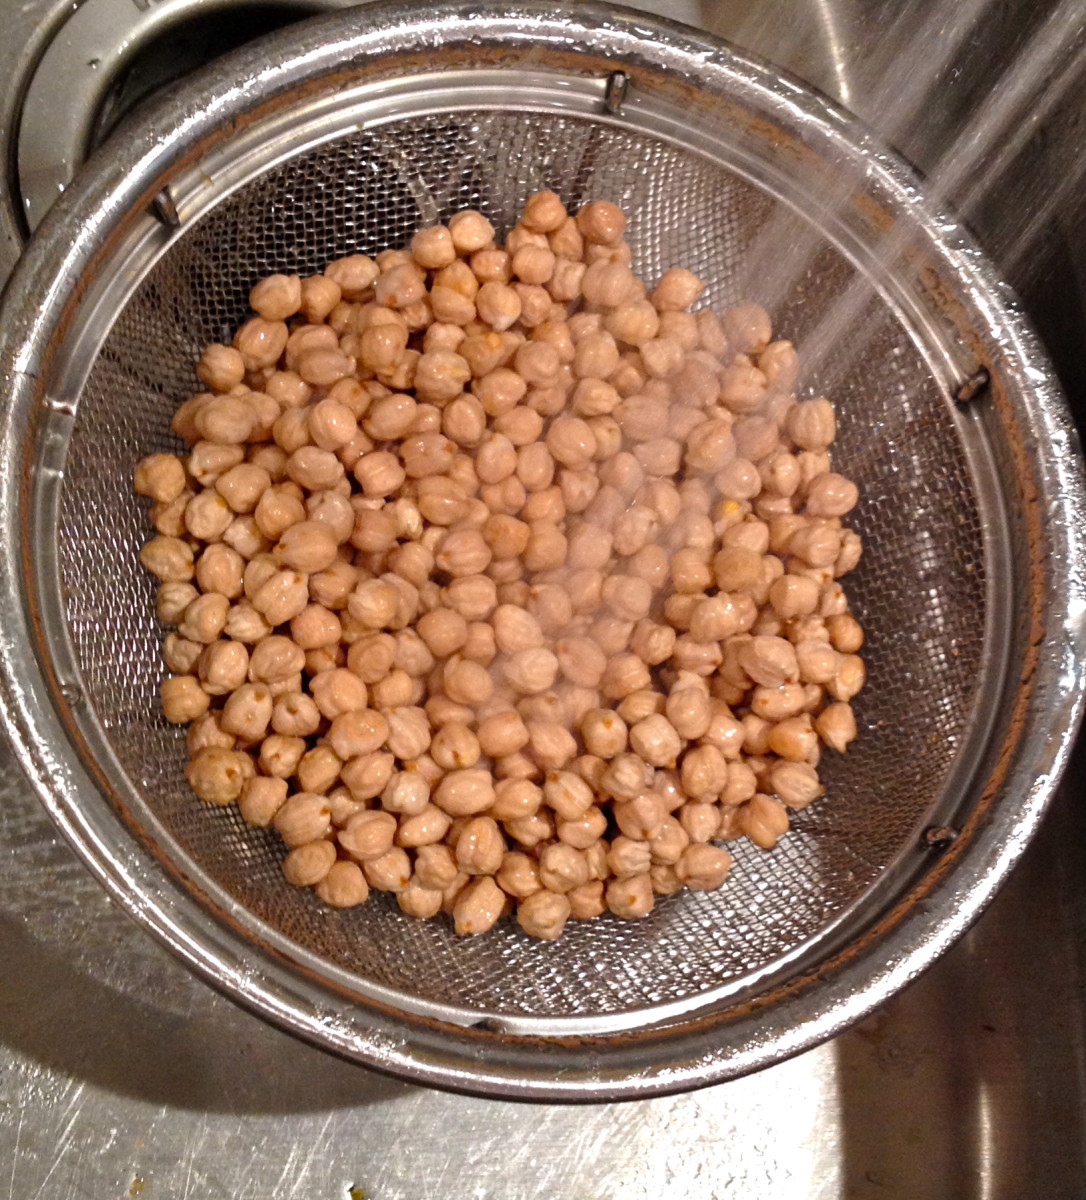 Rinse and sort dried chickpeas, also known as garbanzo beans.